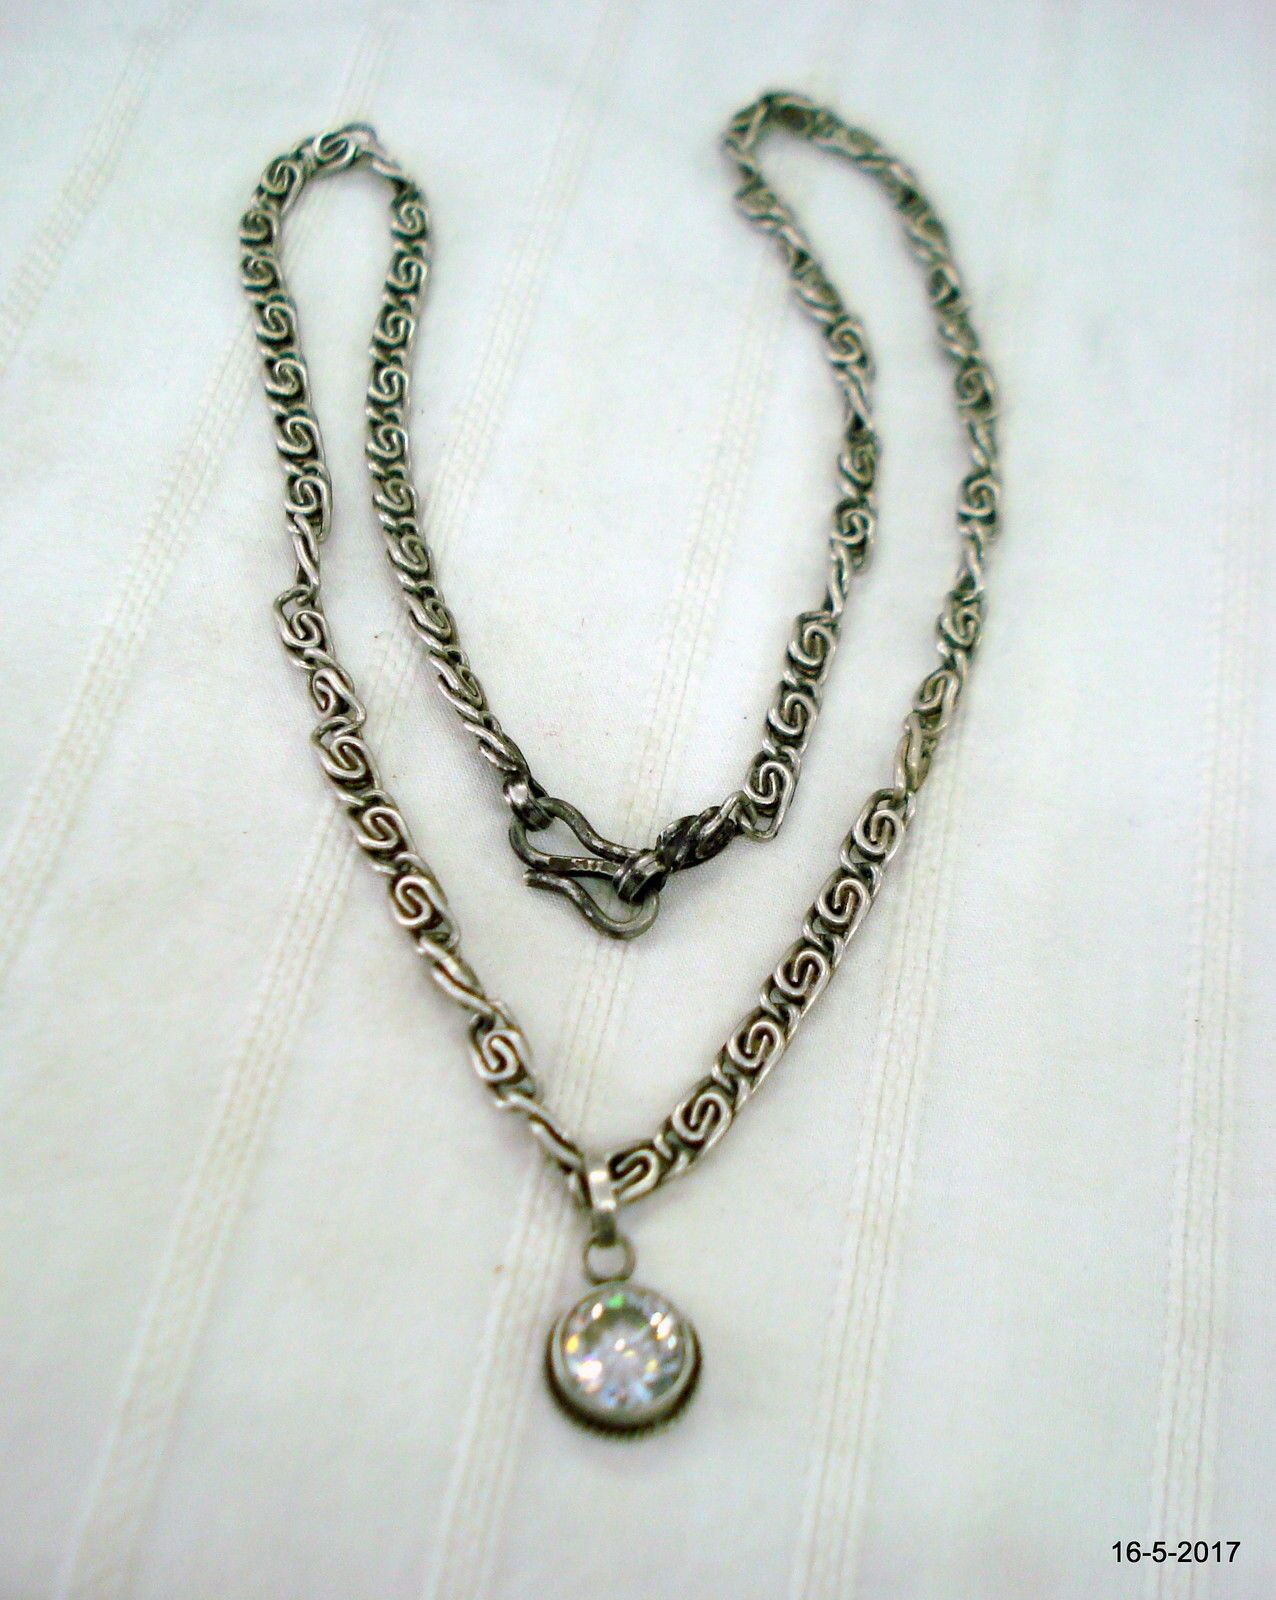 Vintage Antique Tribal Old Silver Chain Pendant Necklace Handmade Jewelry